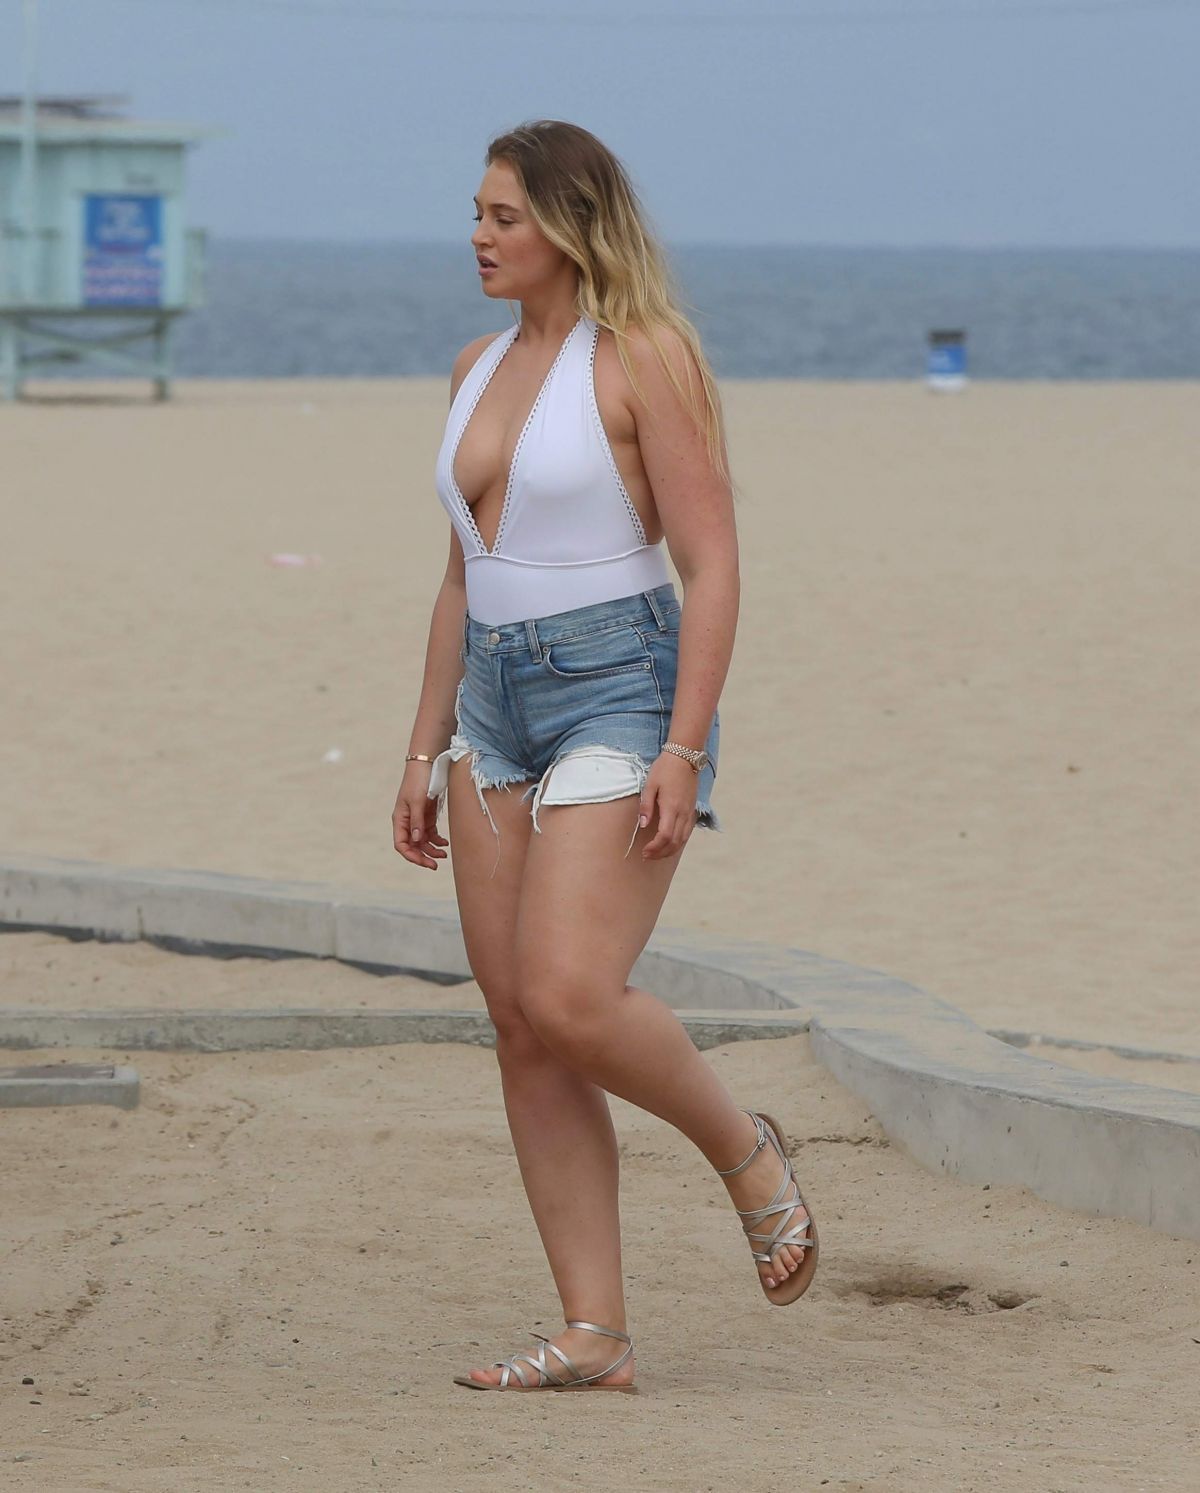 Iskra Lawrence Filming At Venice Beach Iskra Lawrence